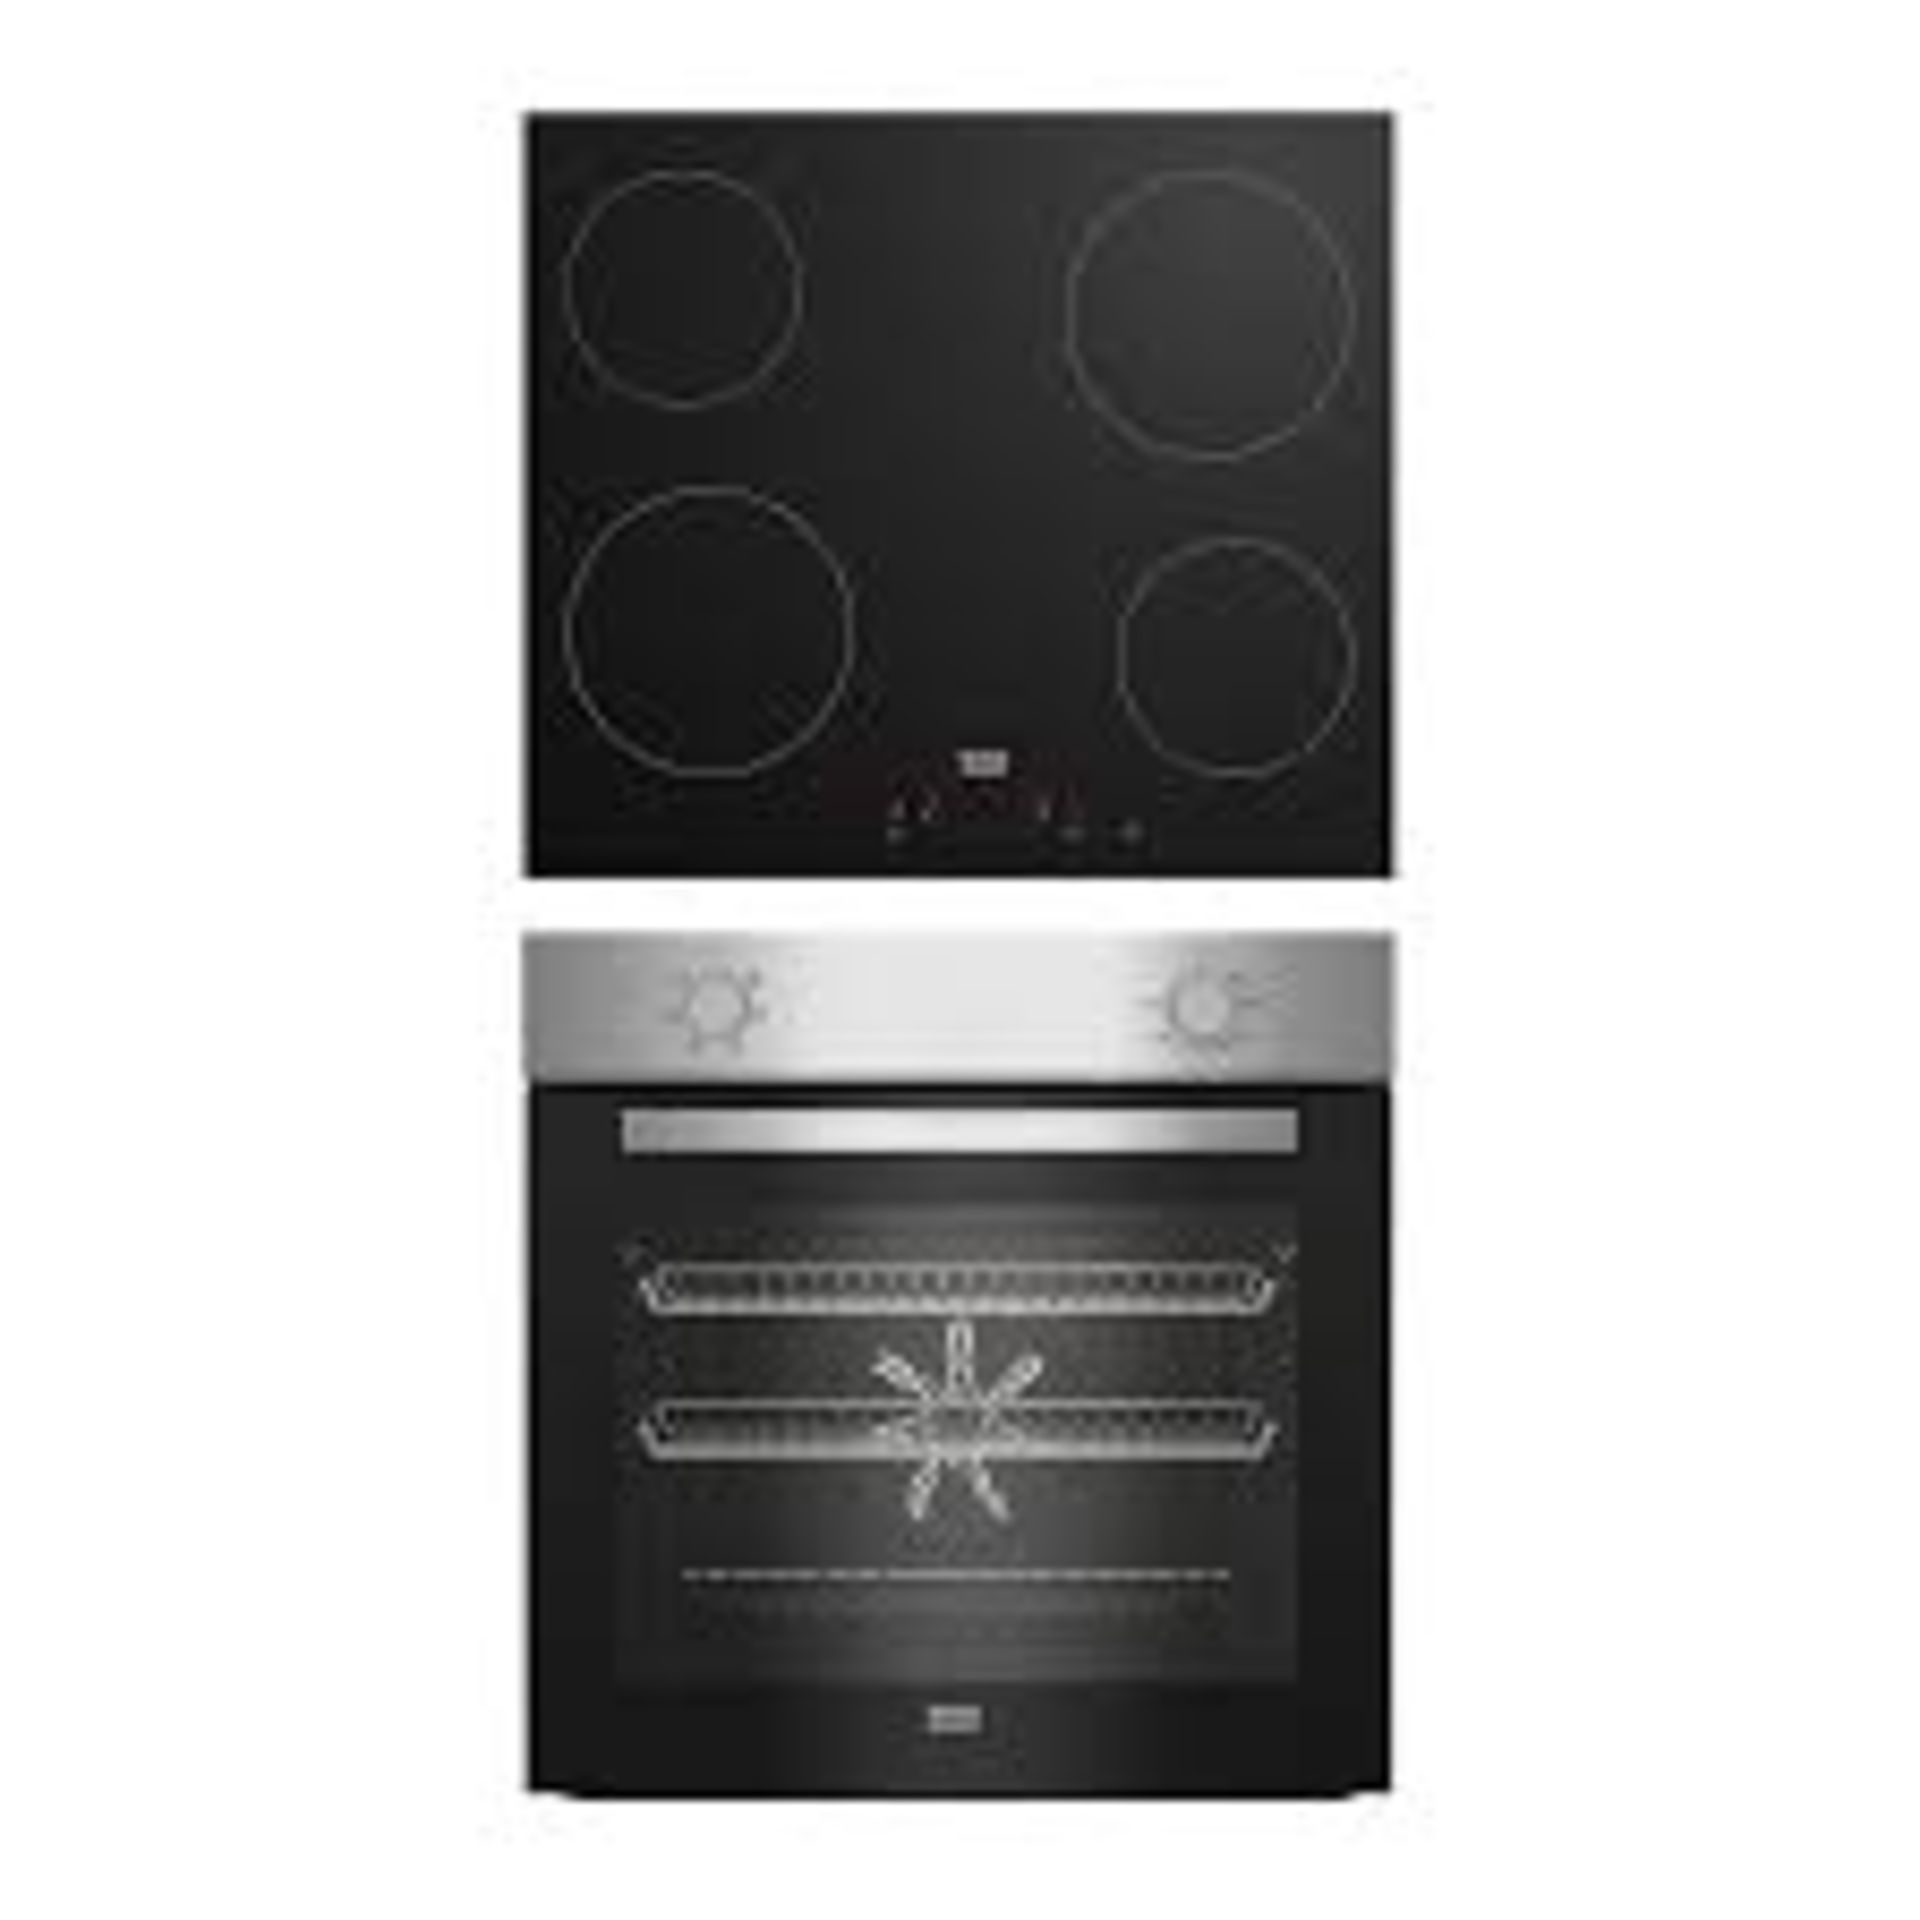 Beko QBSE222X Built-in Multifunction Oven & hob pack . - ER41. Bake perfect cupcakes, roast a